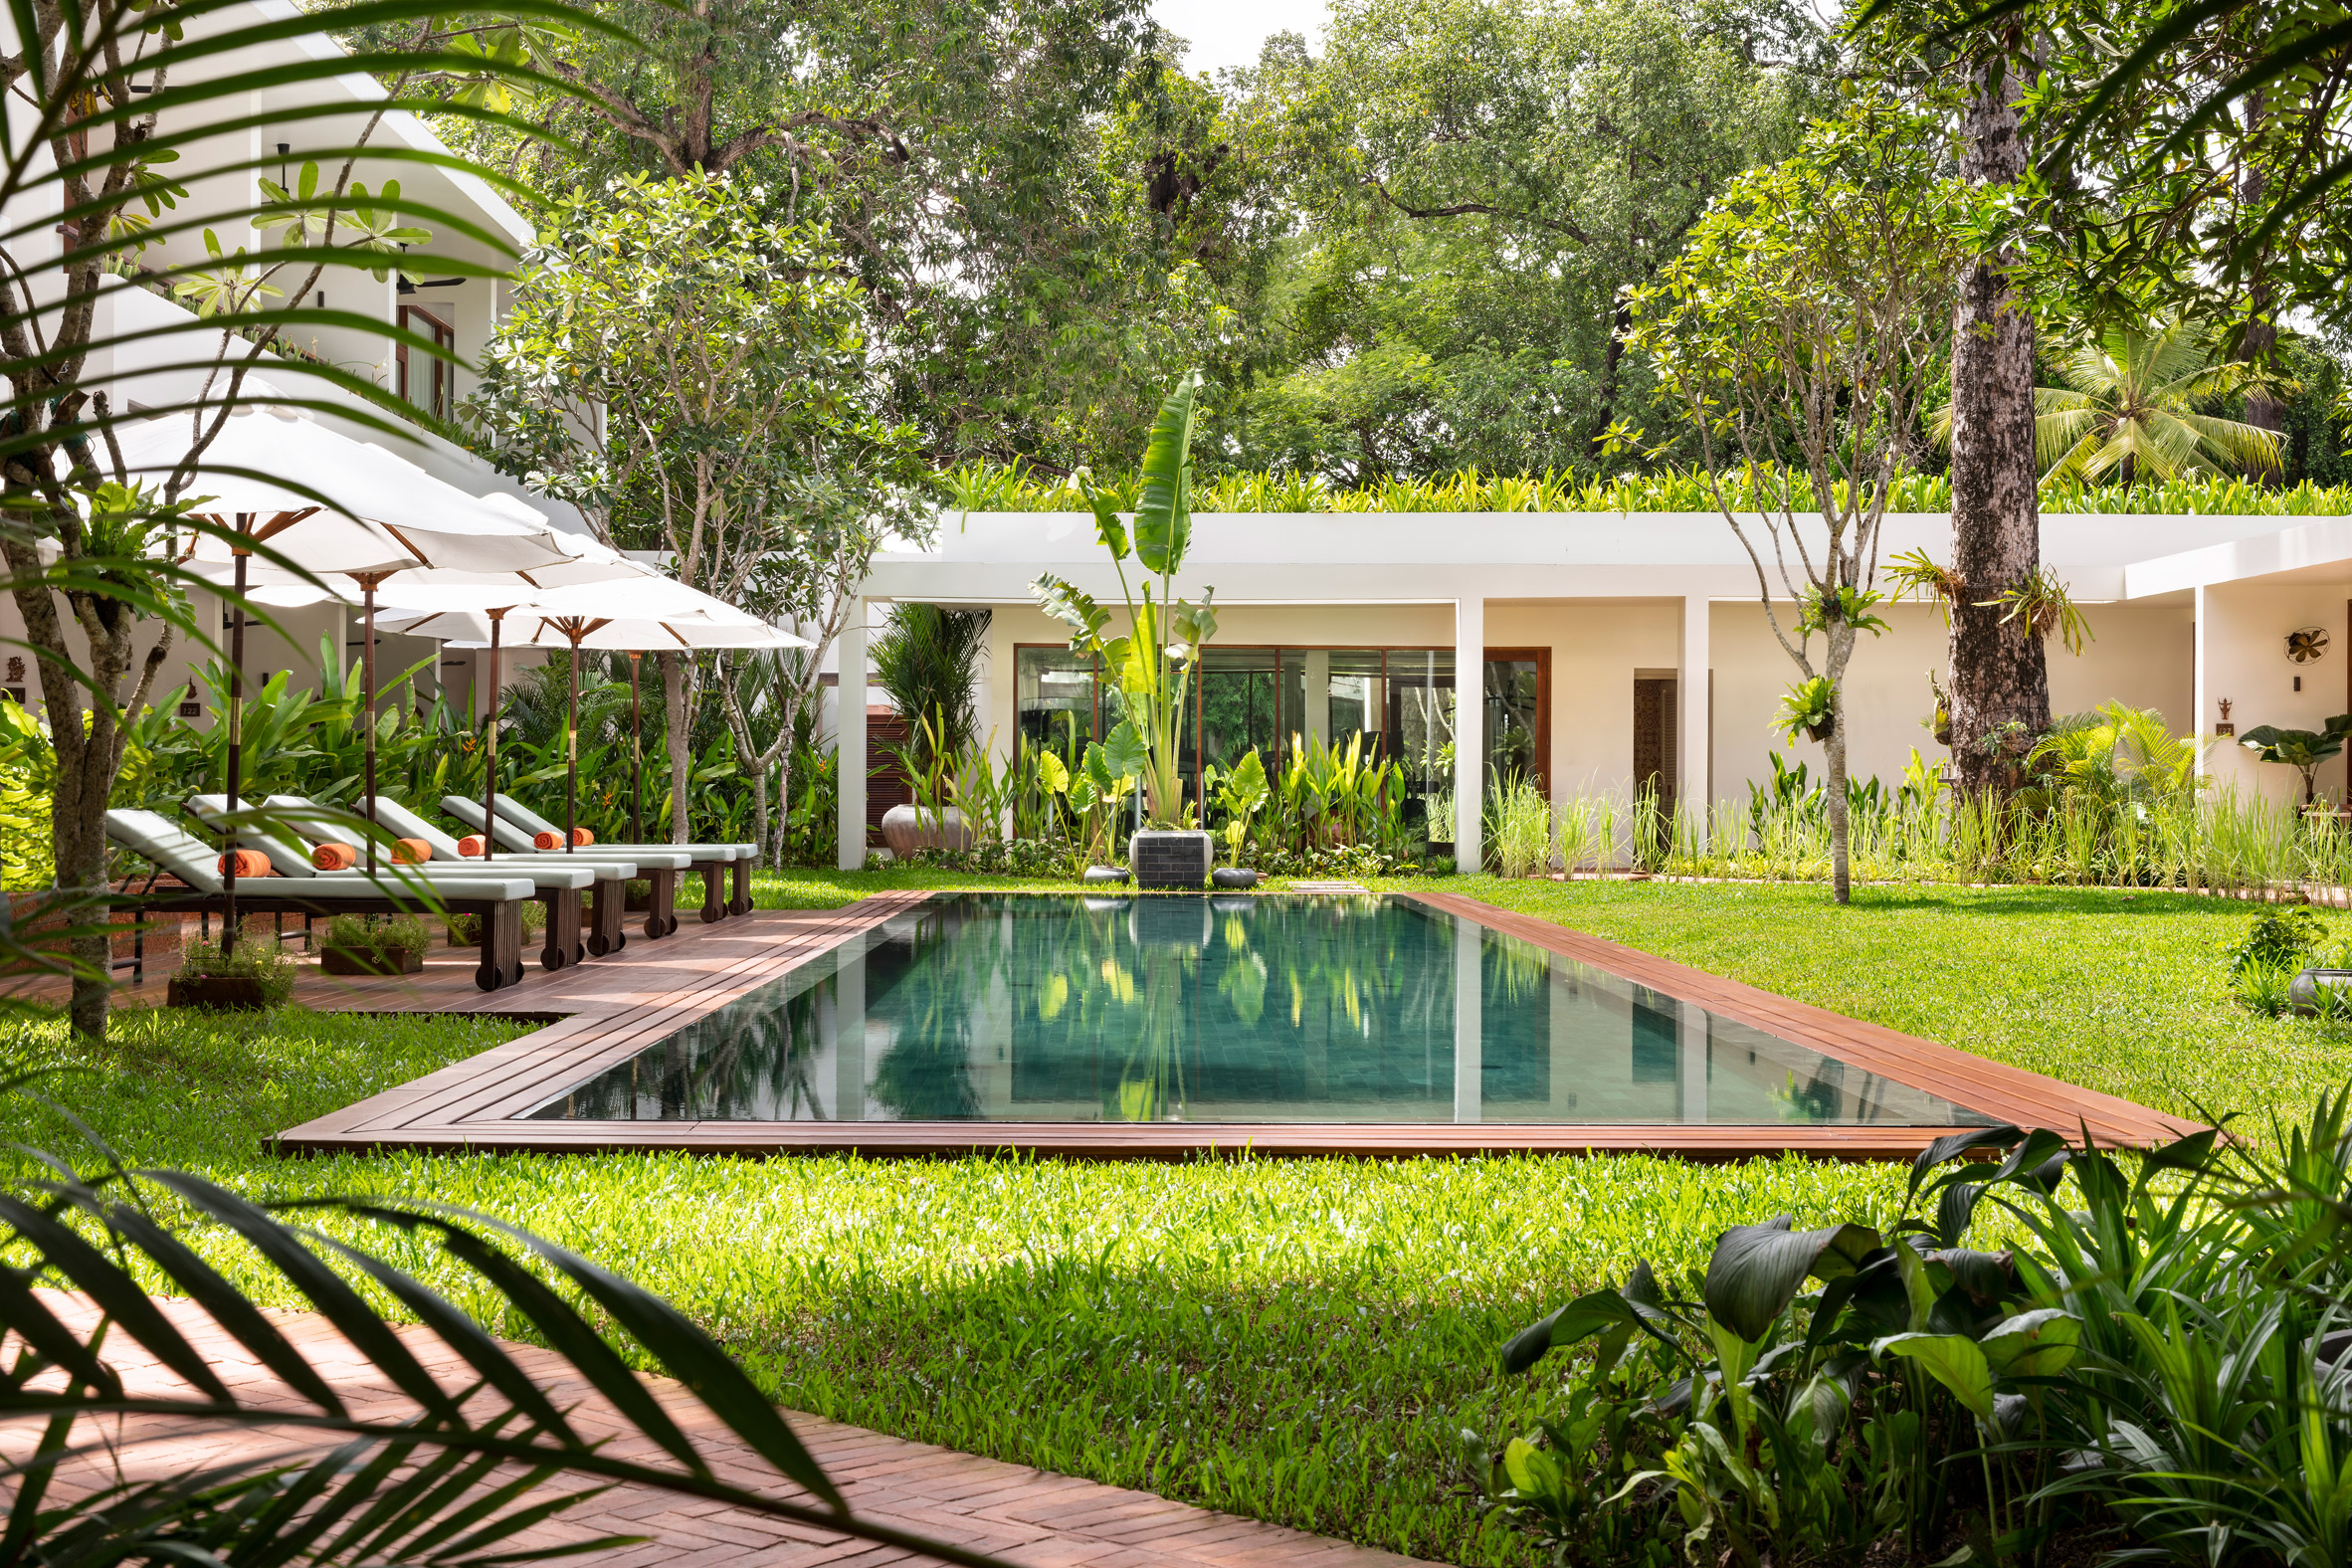 FCC Angkor hotel managed by Avani in Siem Reap, Cambodia